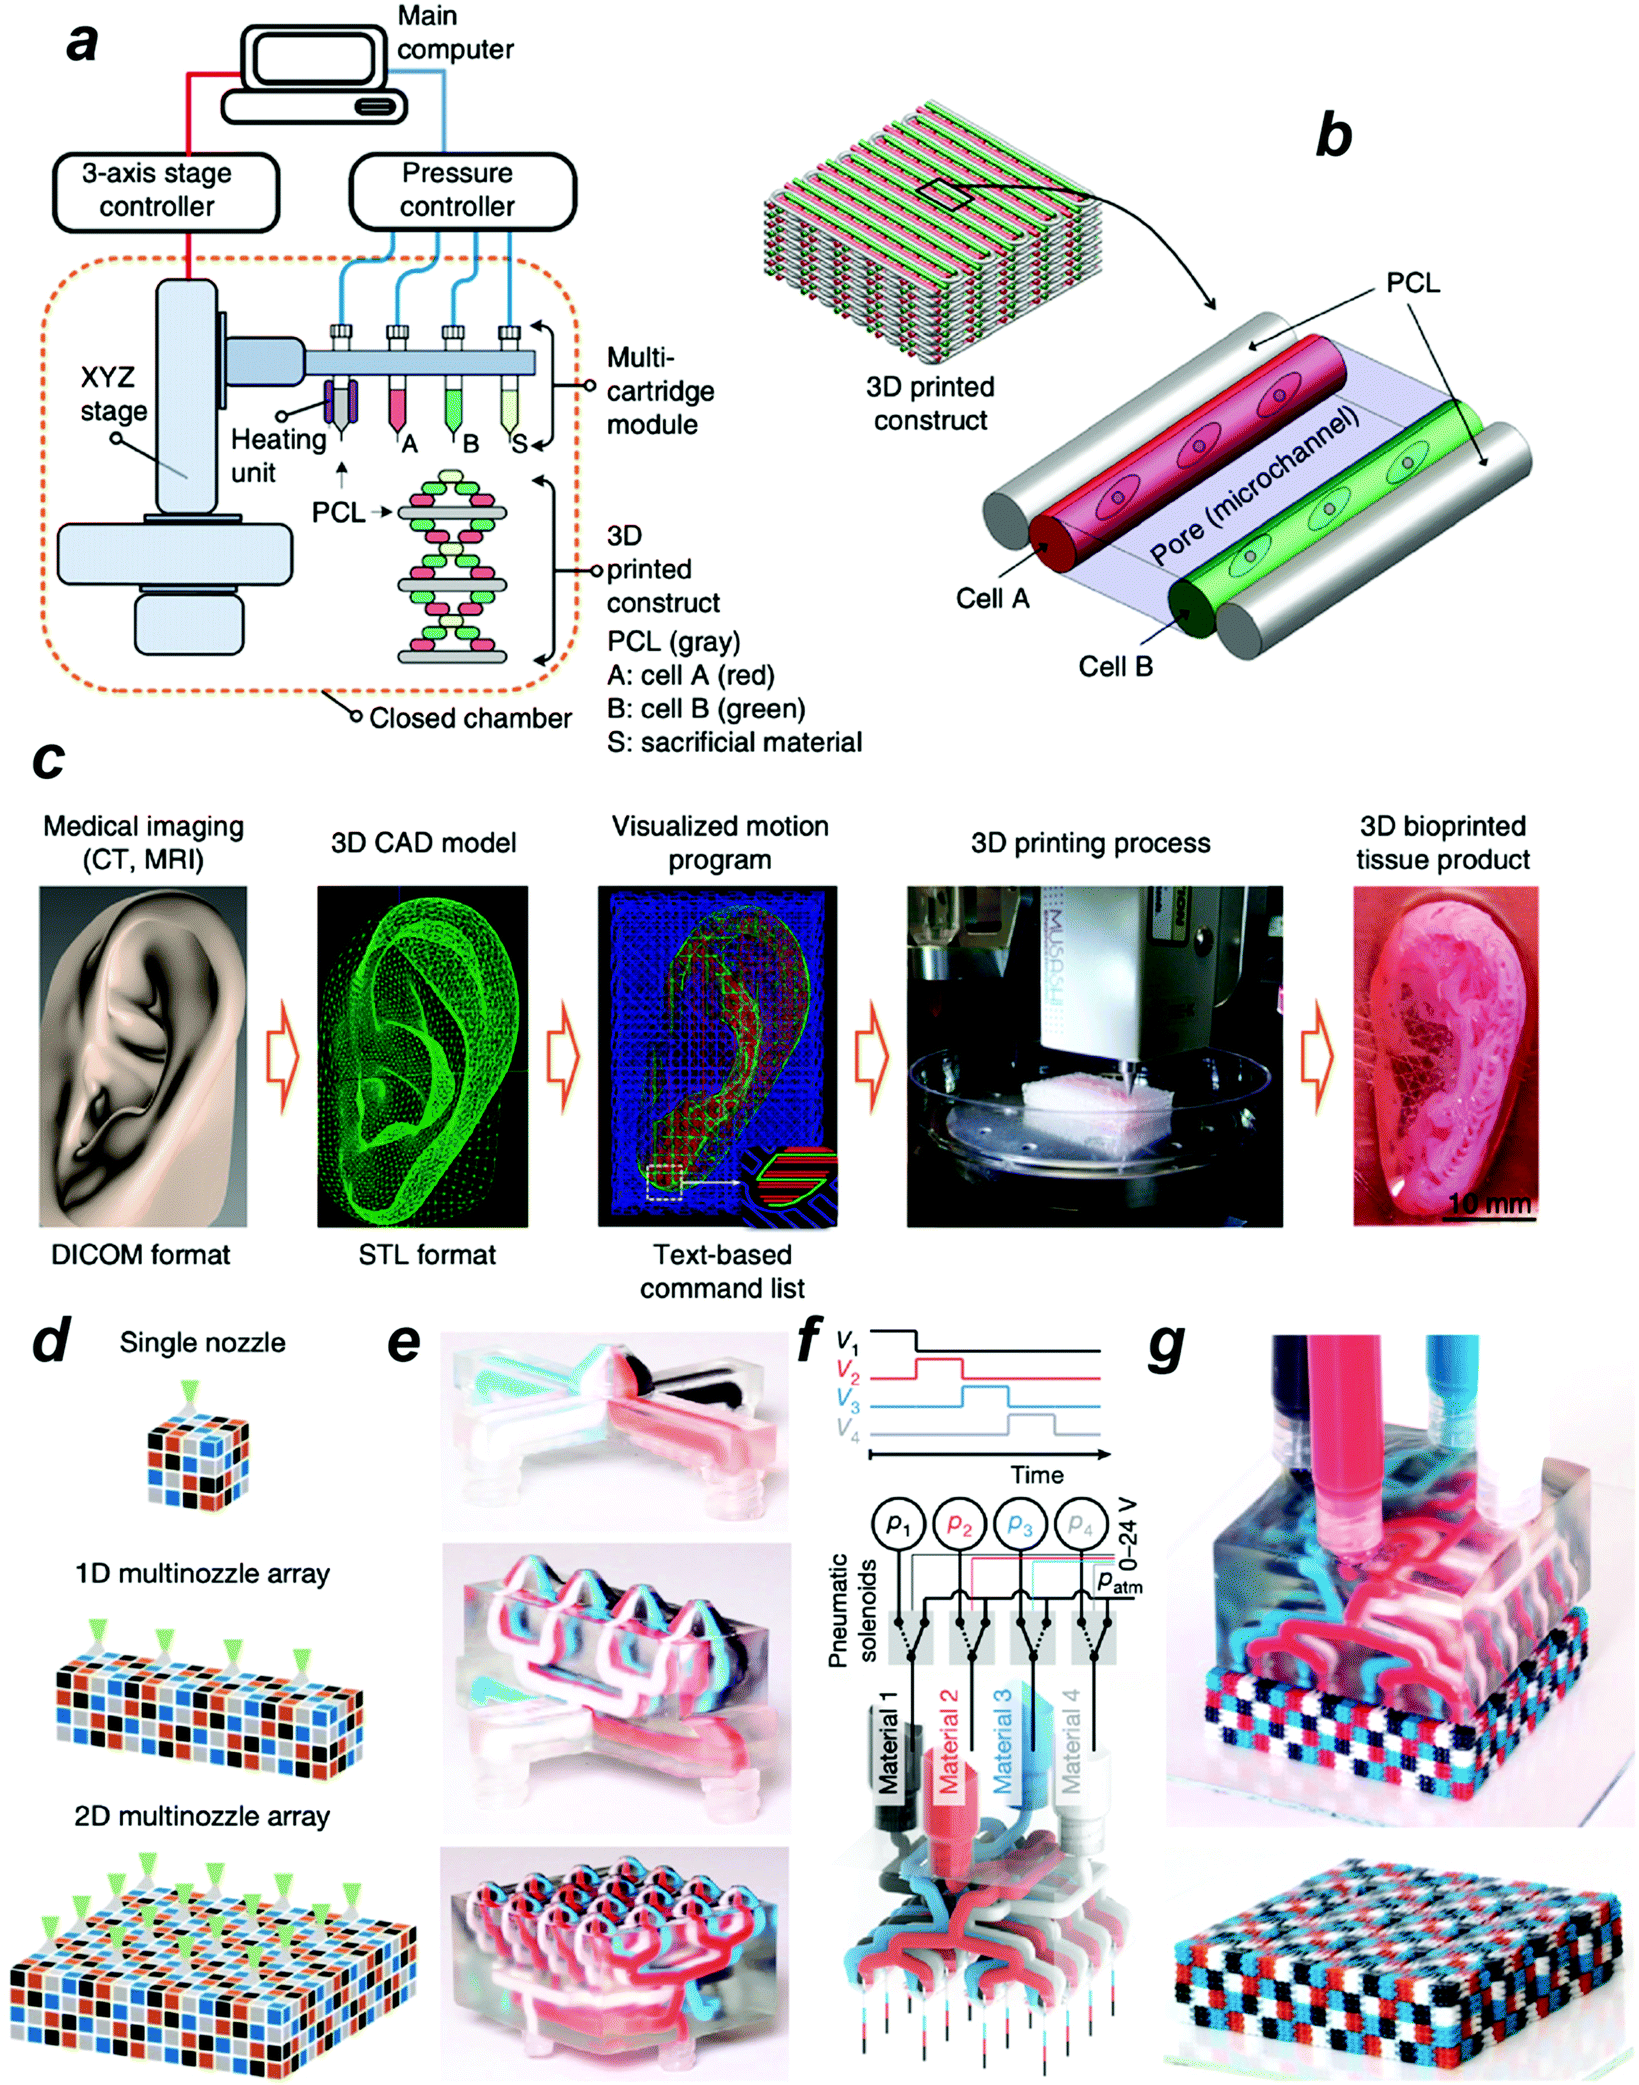 Materials and technical innovations in 3D printing in biomedical 